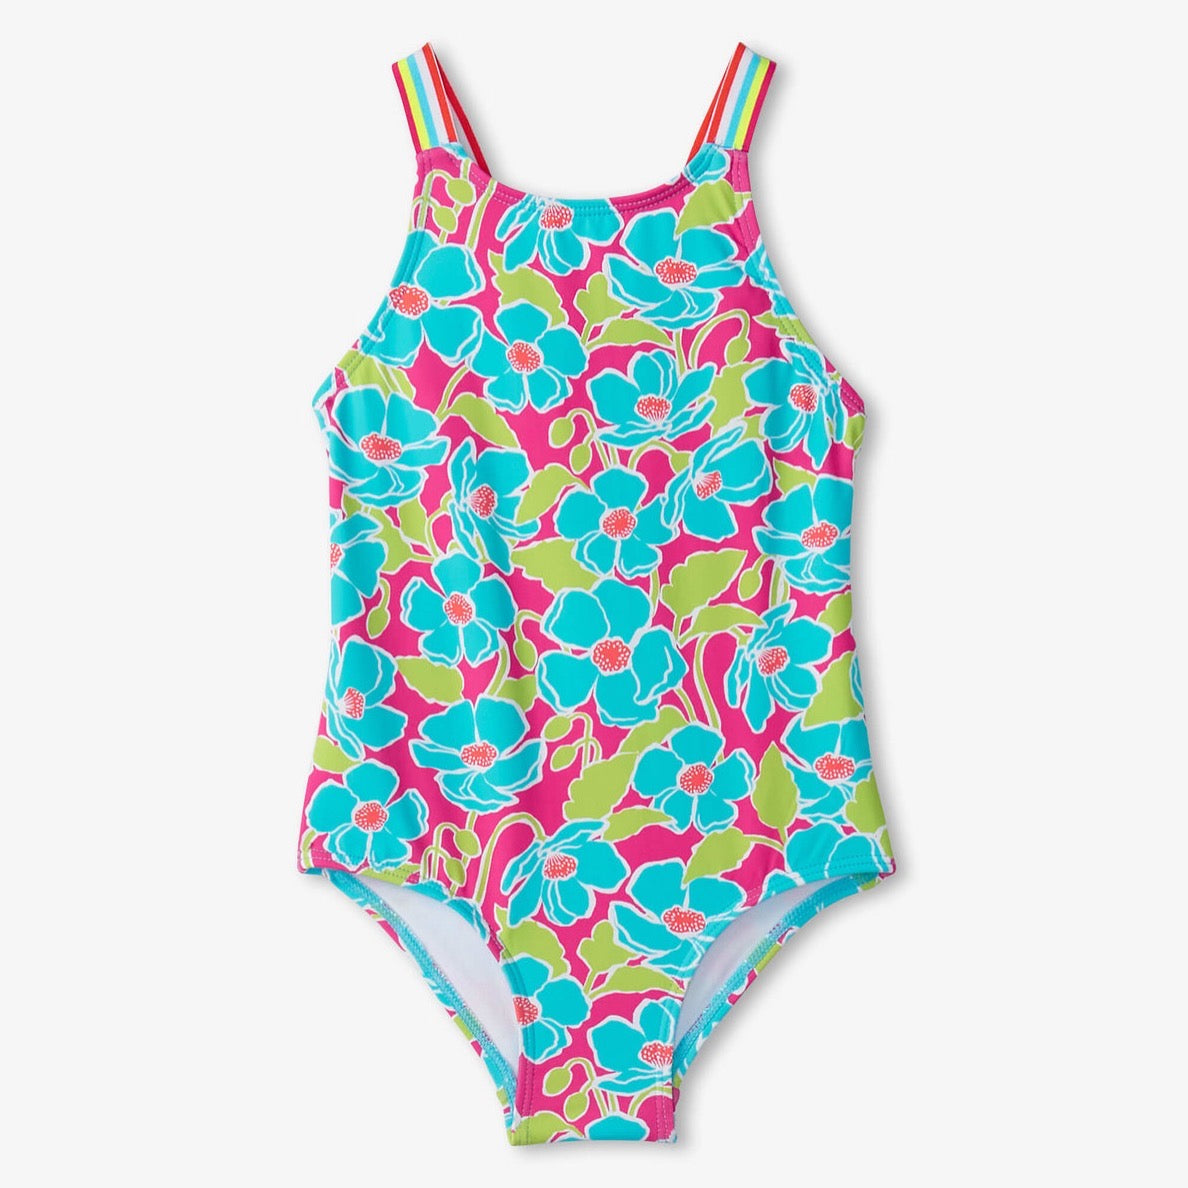 Hatley Floating Poppies Swimsuit S24fpk1780 Clothing 4YRS / Multi,5YRS / Multi,6YRS / Multi,7YRS / Multi,8YRS / Multi,10YRS / Multi